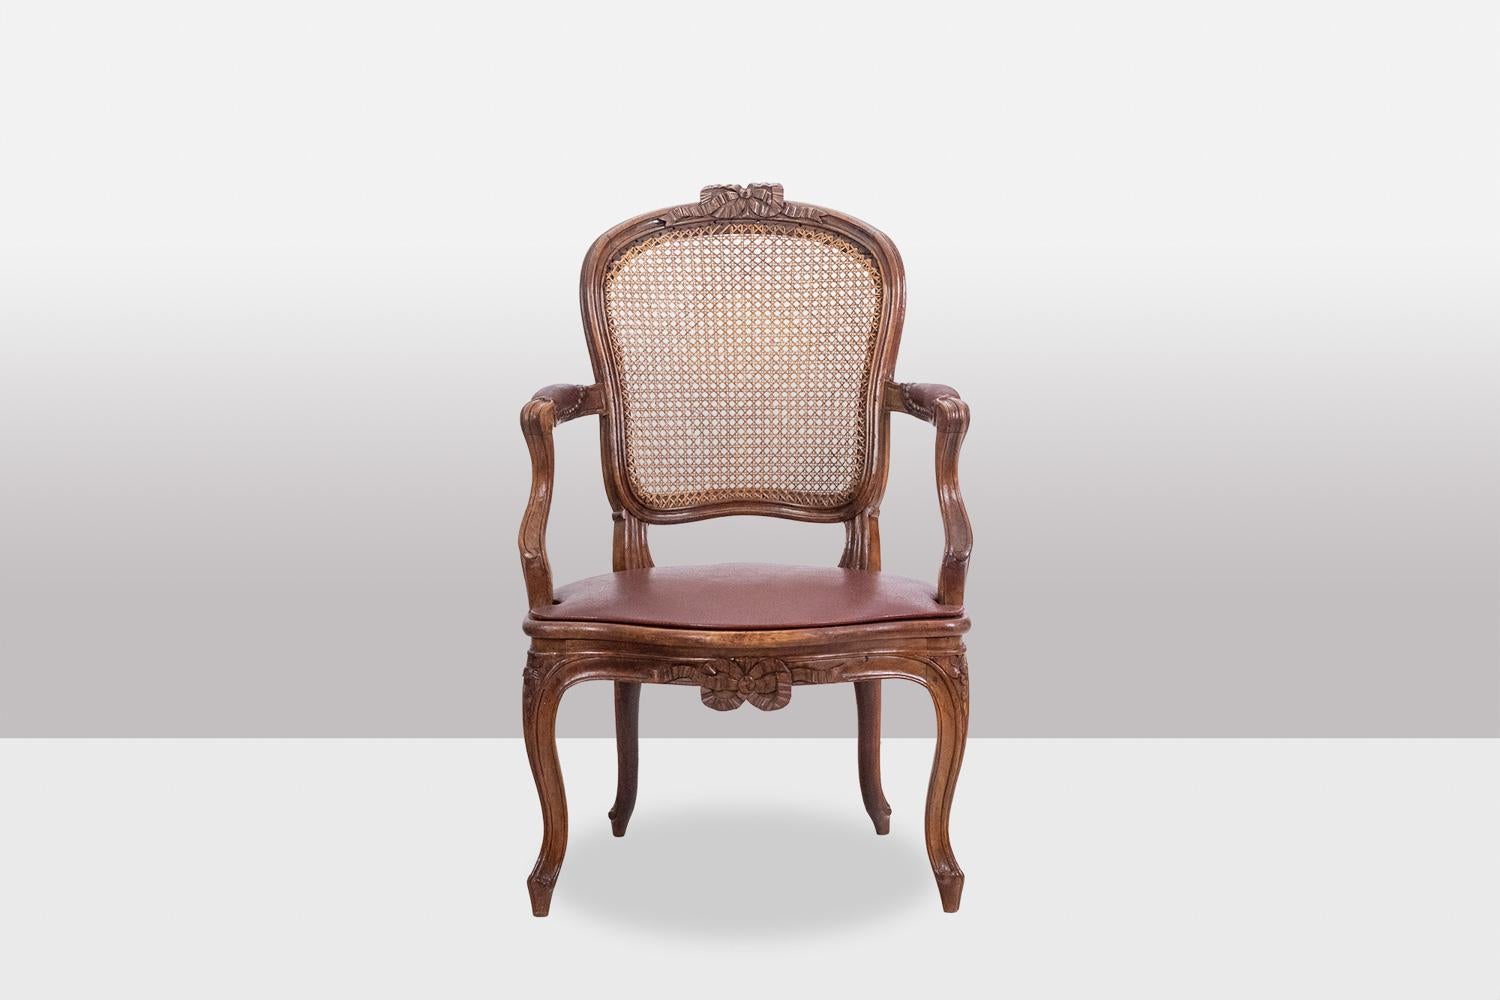 F.L., stamped.

Pair of “cabriolet” armchairs in walnut, decorated with ribbons at the top of the back and in the center of the belt. Cane seat and back, the seat covered with a leather pad in red tones. Curved base ending in a decoration of fine